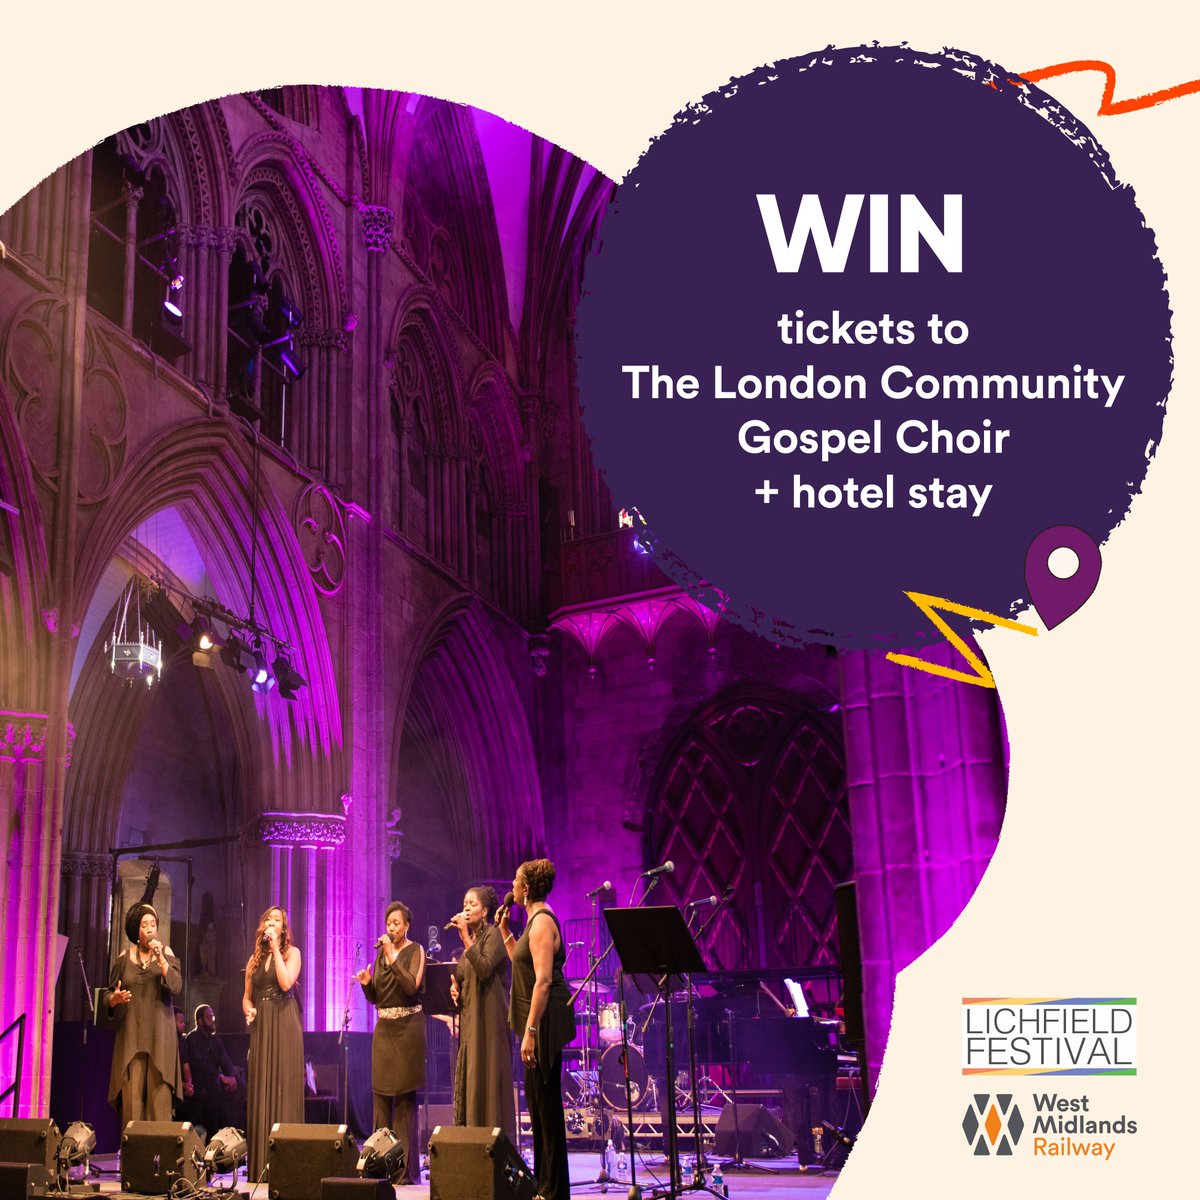 🎻 The beloved festival comes back to Lichfield for 2023. 

Join our #COMPETITION organised with @lichfieldfest to win tickets to the London Community Gospel Choir with a complimentary overnight stay at Swinfen Hall.

Enter before 29/06 > orlo.uk/UEbGr

#LichFest23